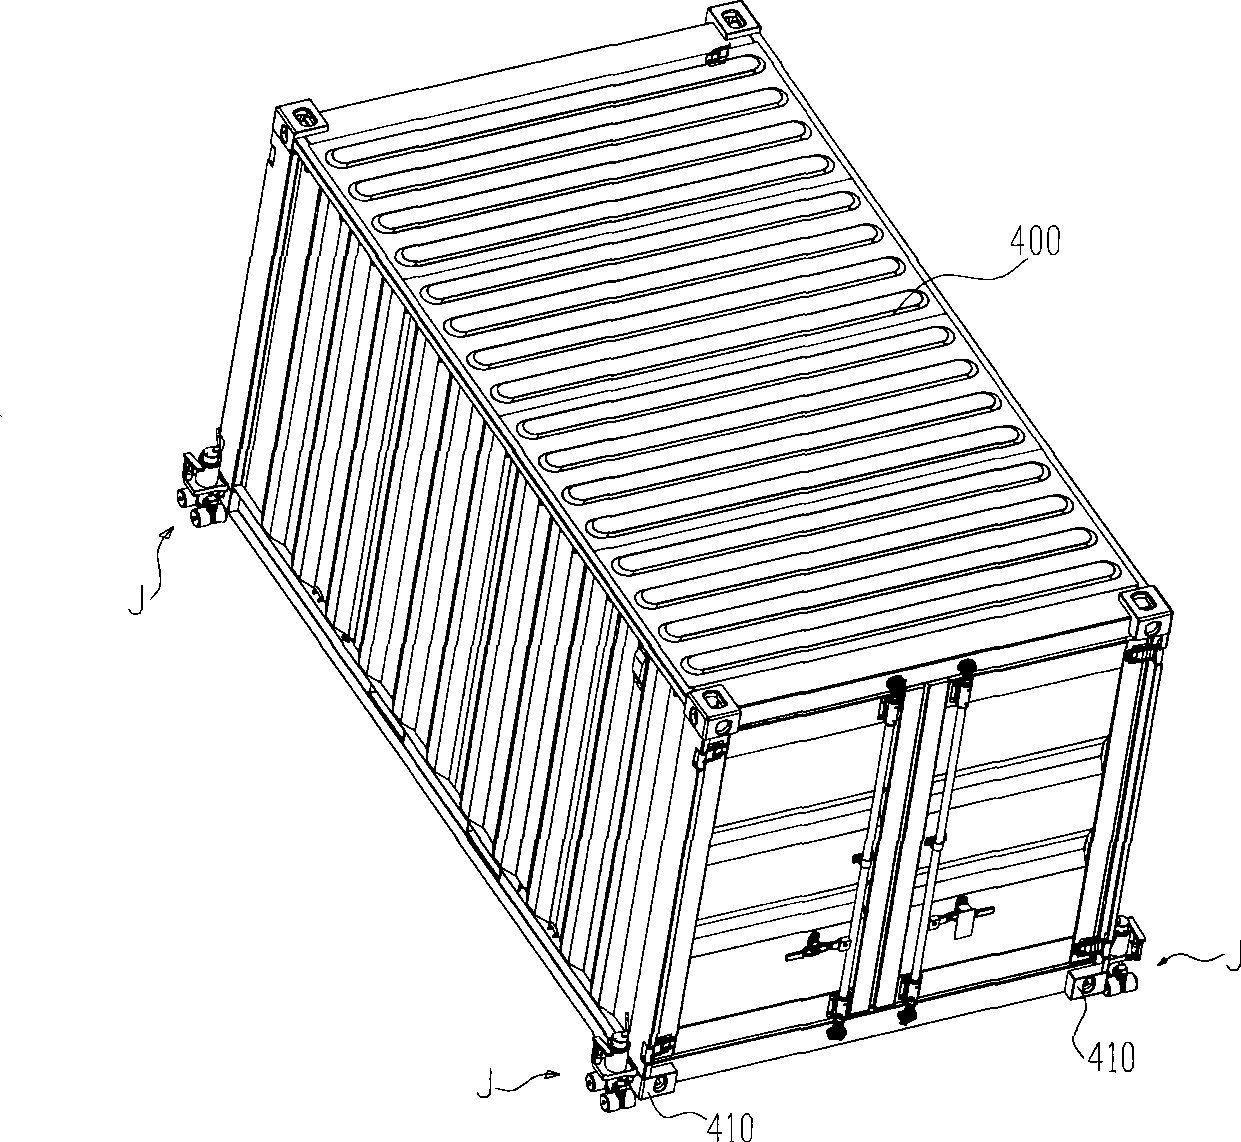 Hydraulic unit, castor assembly and container moving device and method